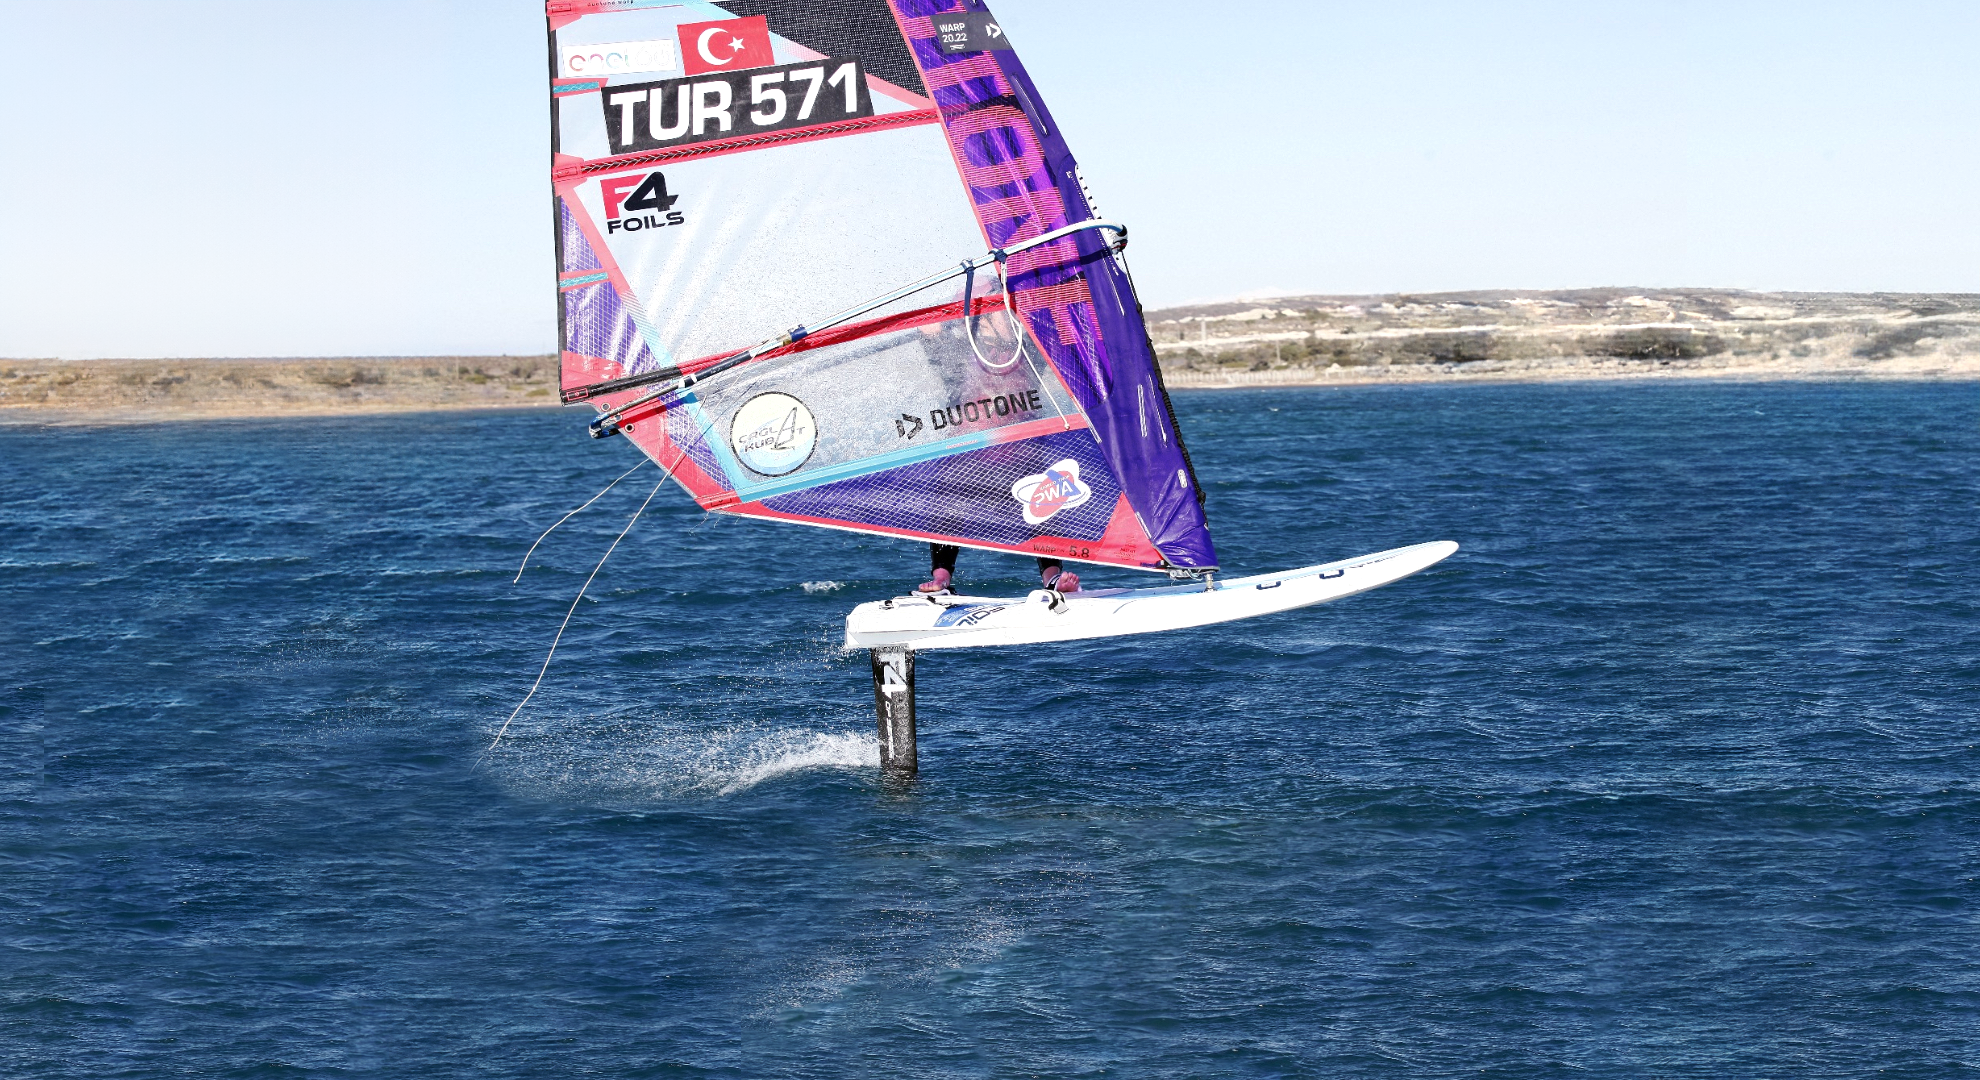 ercan elif We are welcoming Elif Ercan to the F4 Windsurf Team!